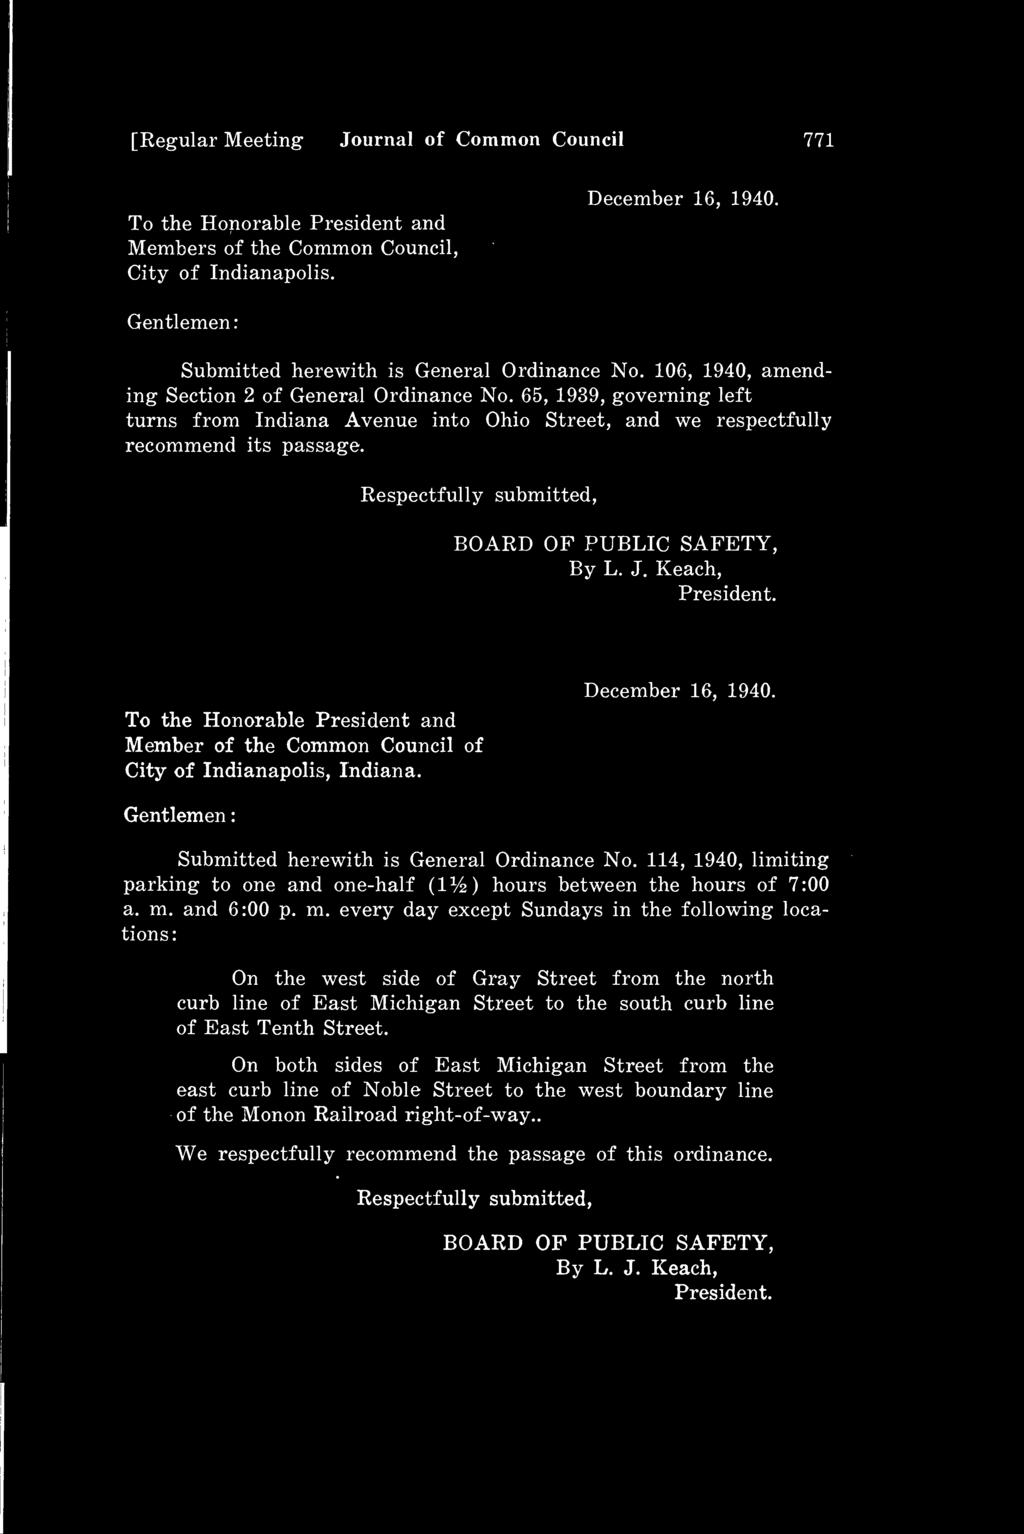 [Regular Meeting Journal of Common Council 771 To the Honorable President and Members of the Common Council, City of Indianapolis. December 16, 1940. Submitted herewith is General Ordinance No.